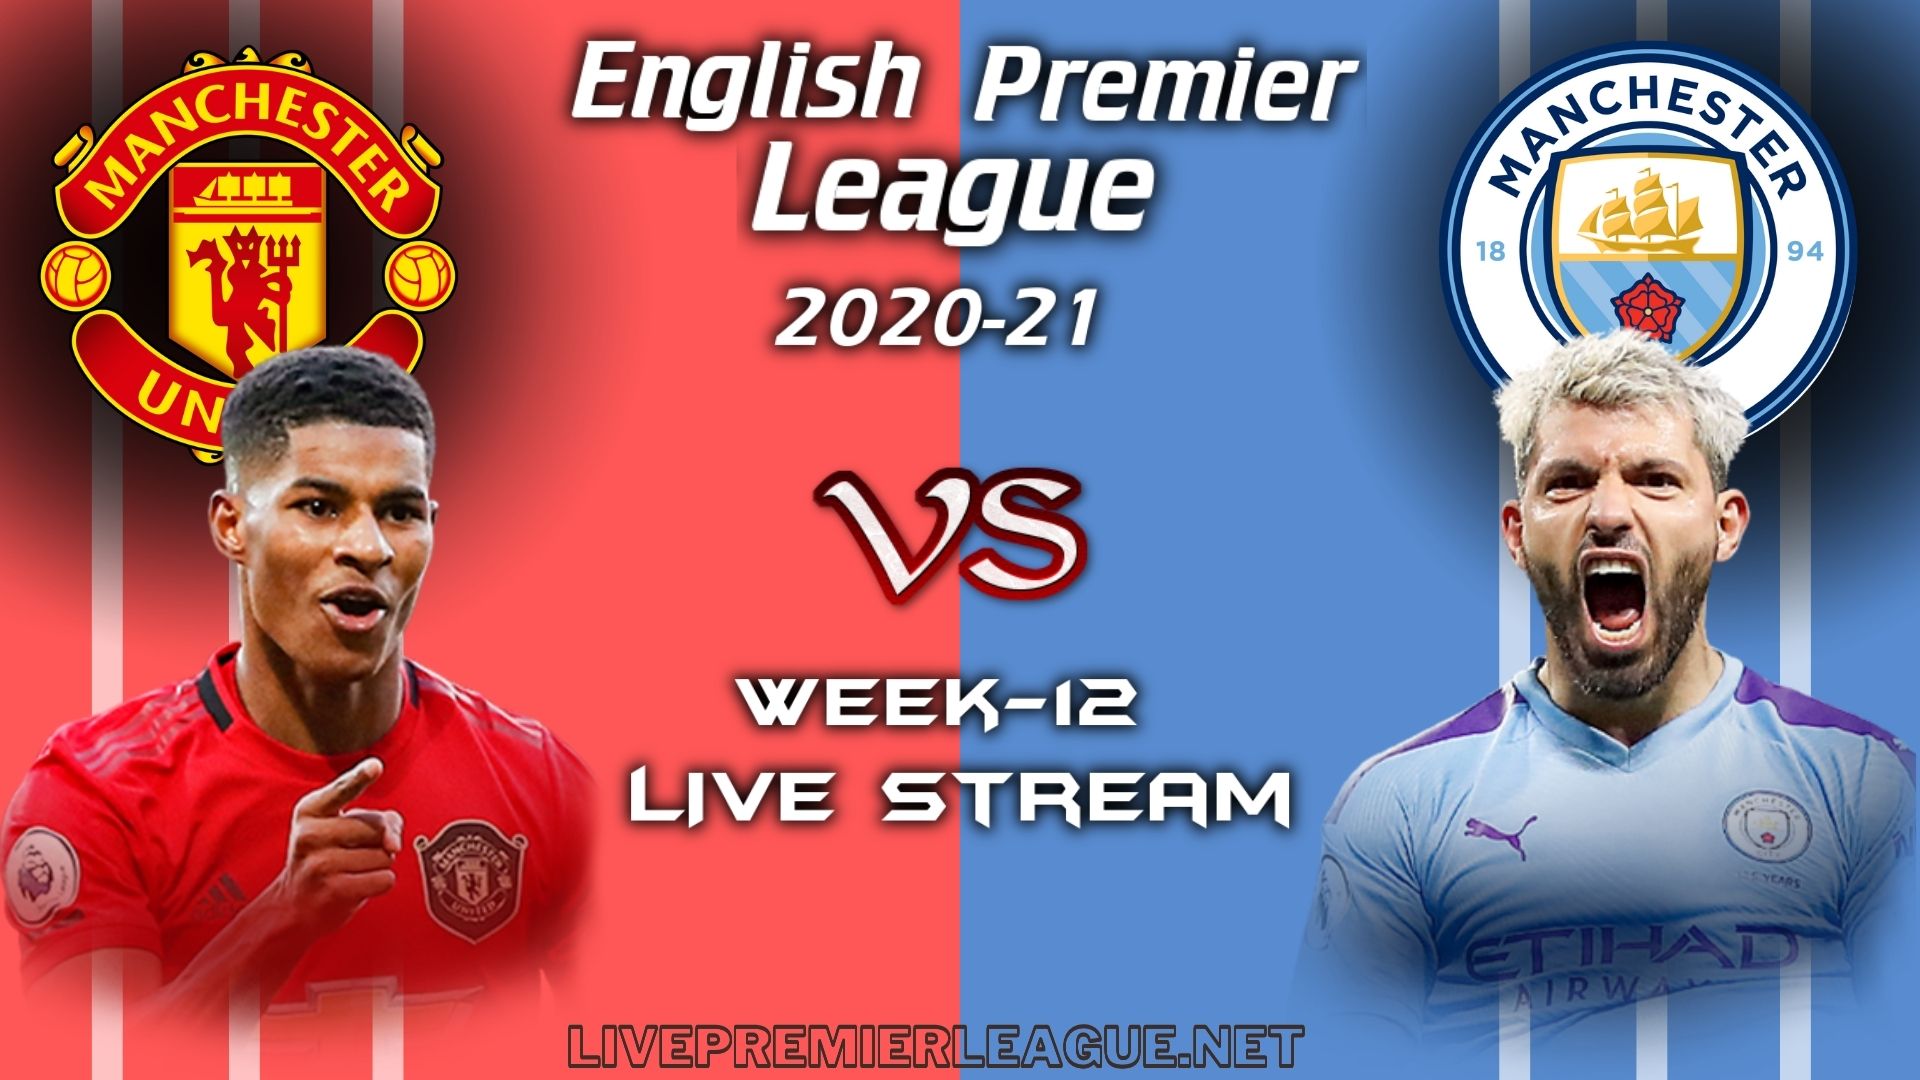 Manchester United Vs Manchester City Live Stream 2020 | Week 12